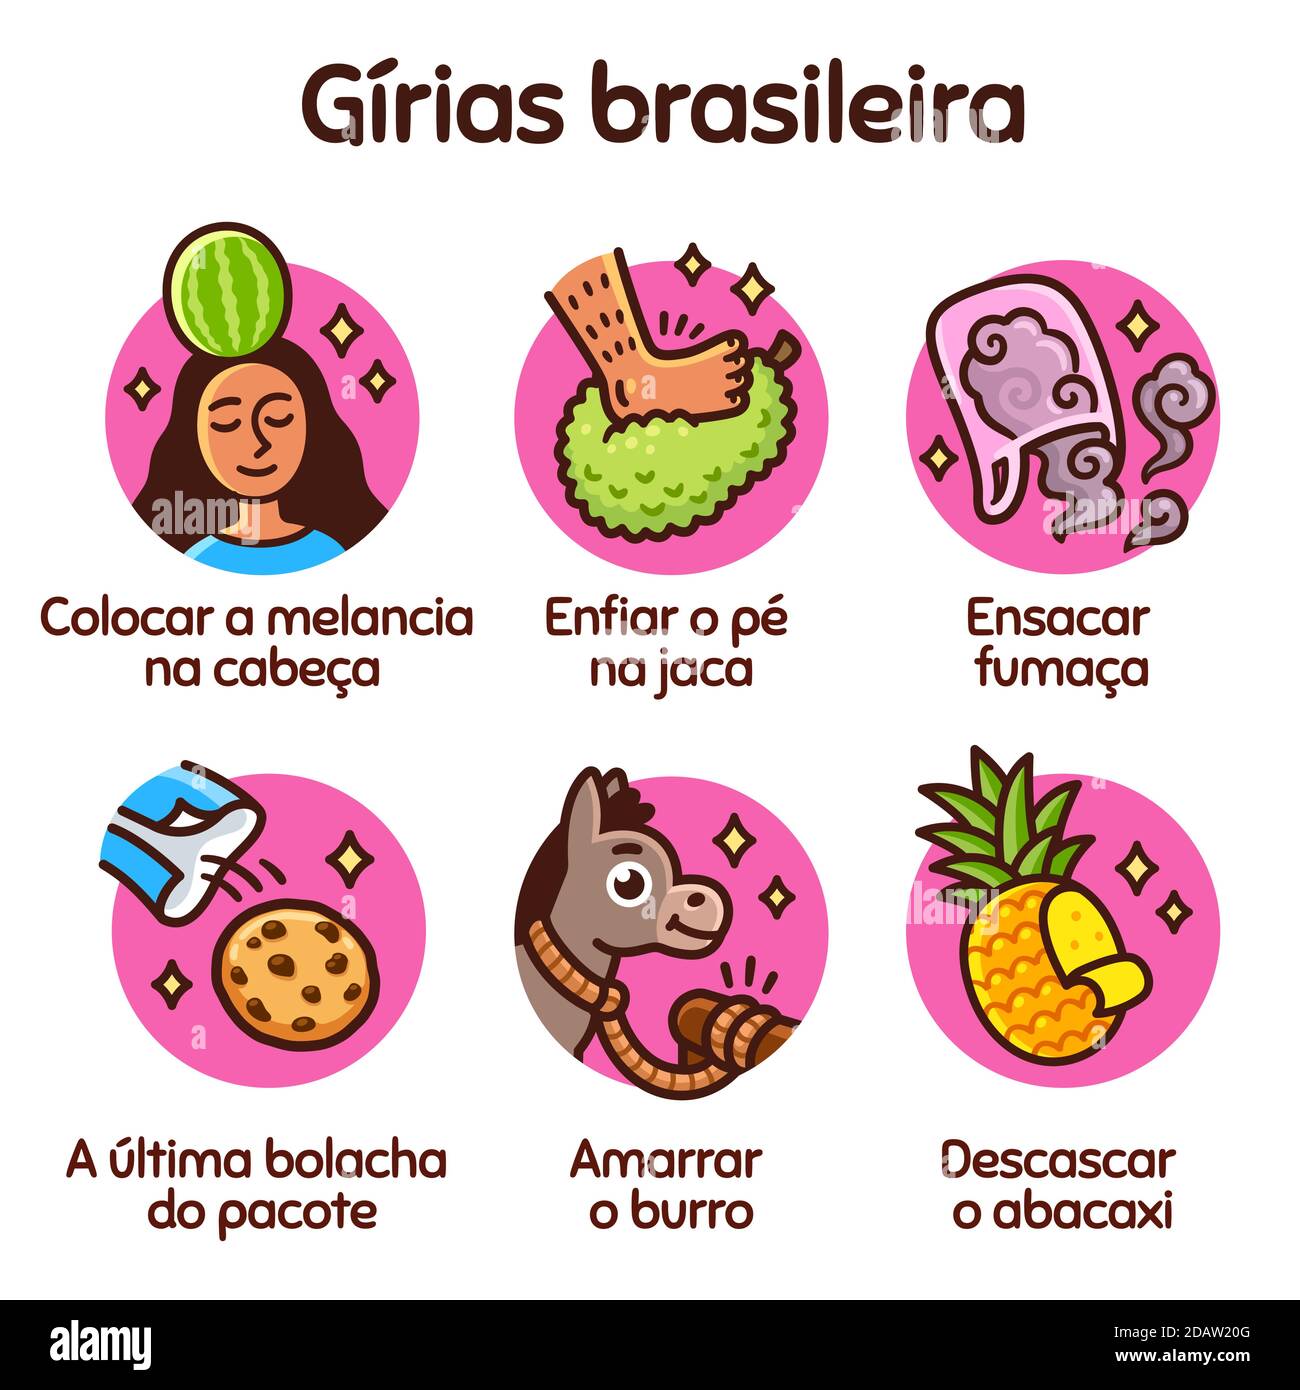 Cartoon drawing of Brazilian slang expressions in their literal meaning. Funny vector illustration set. Stock Vector